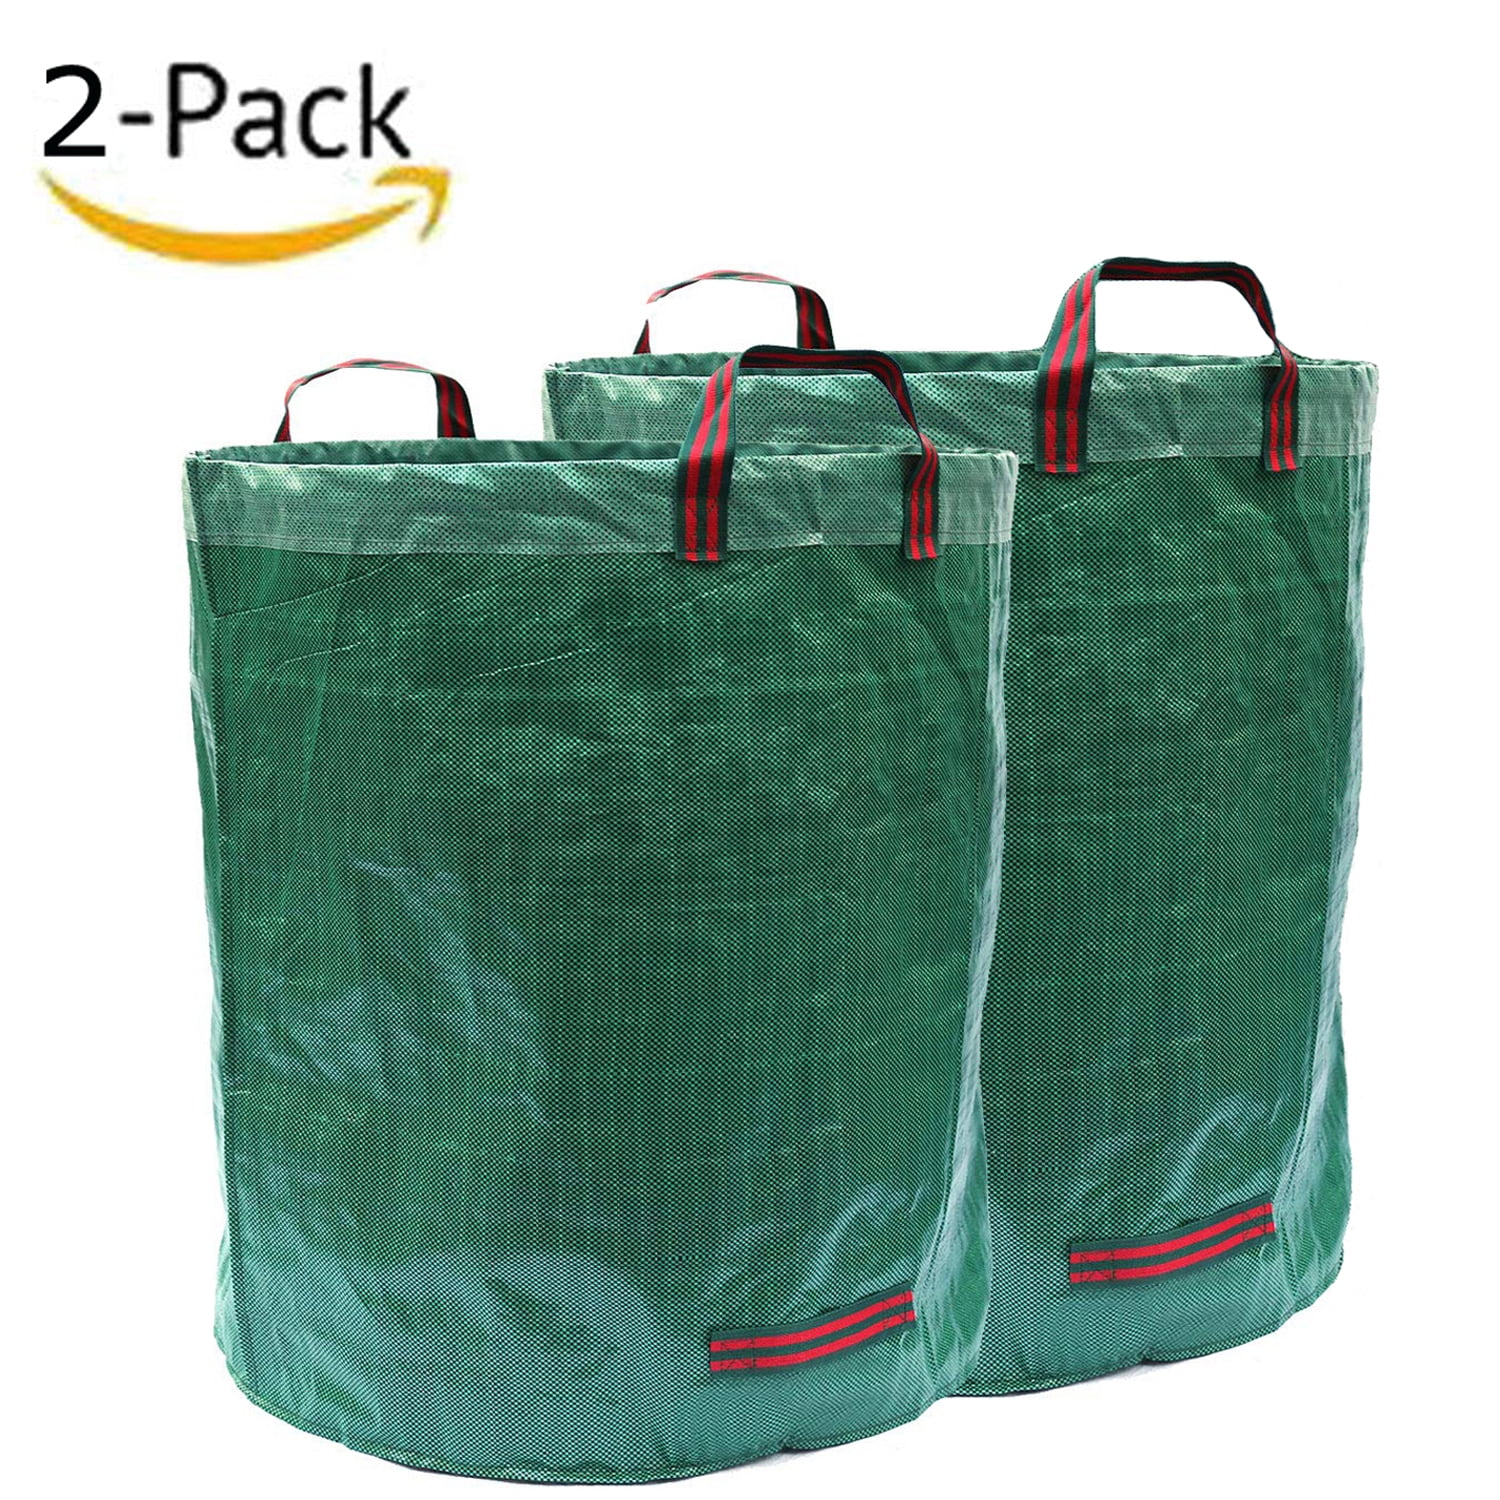 Clean Up Leaves and Waste Reusable Yard Waste Bag Leaf Bag 2-Pack 80 Gallons Lawn and Patio Ugold 2-Pack Garden Bag Work for Garden 